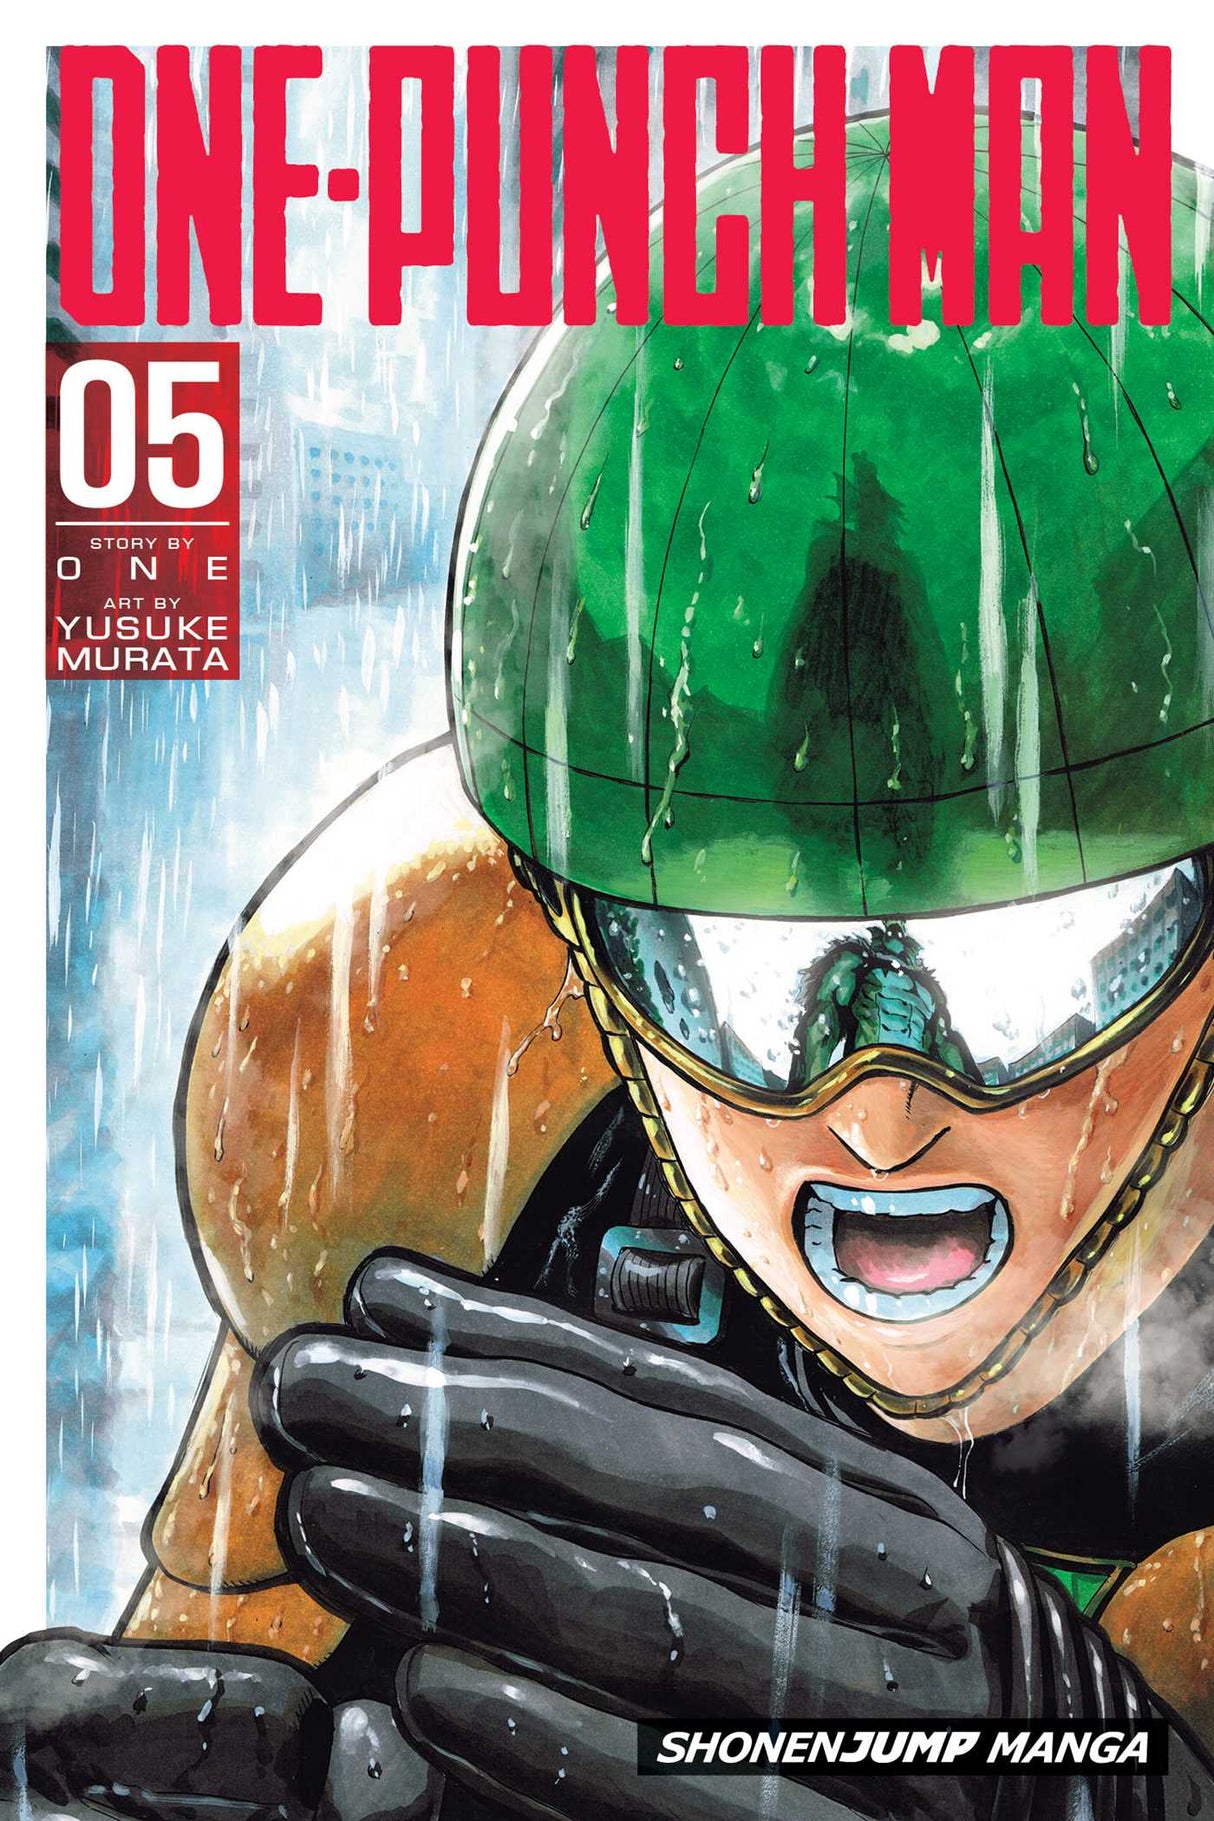 Cover image of the Manga One-Punch-Man-Vol-5